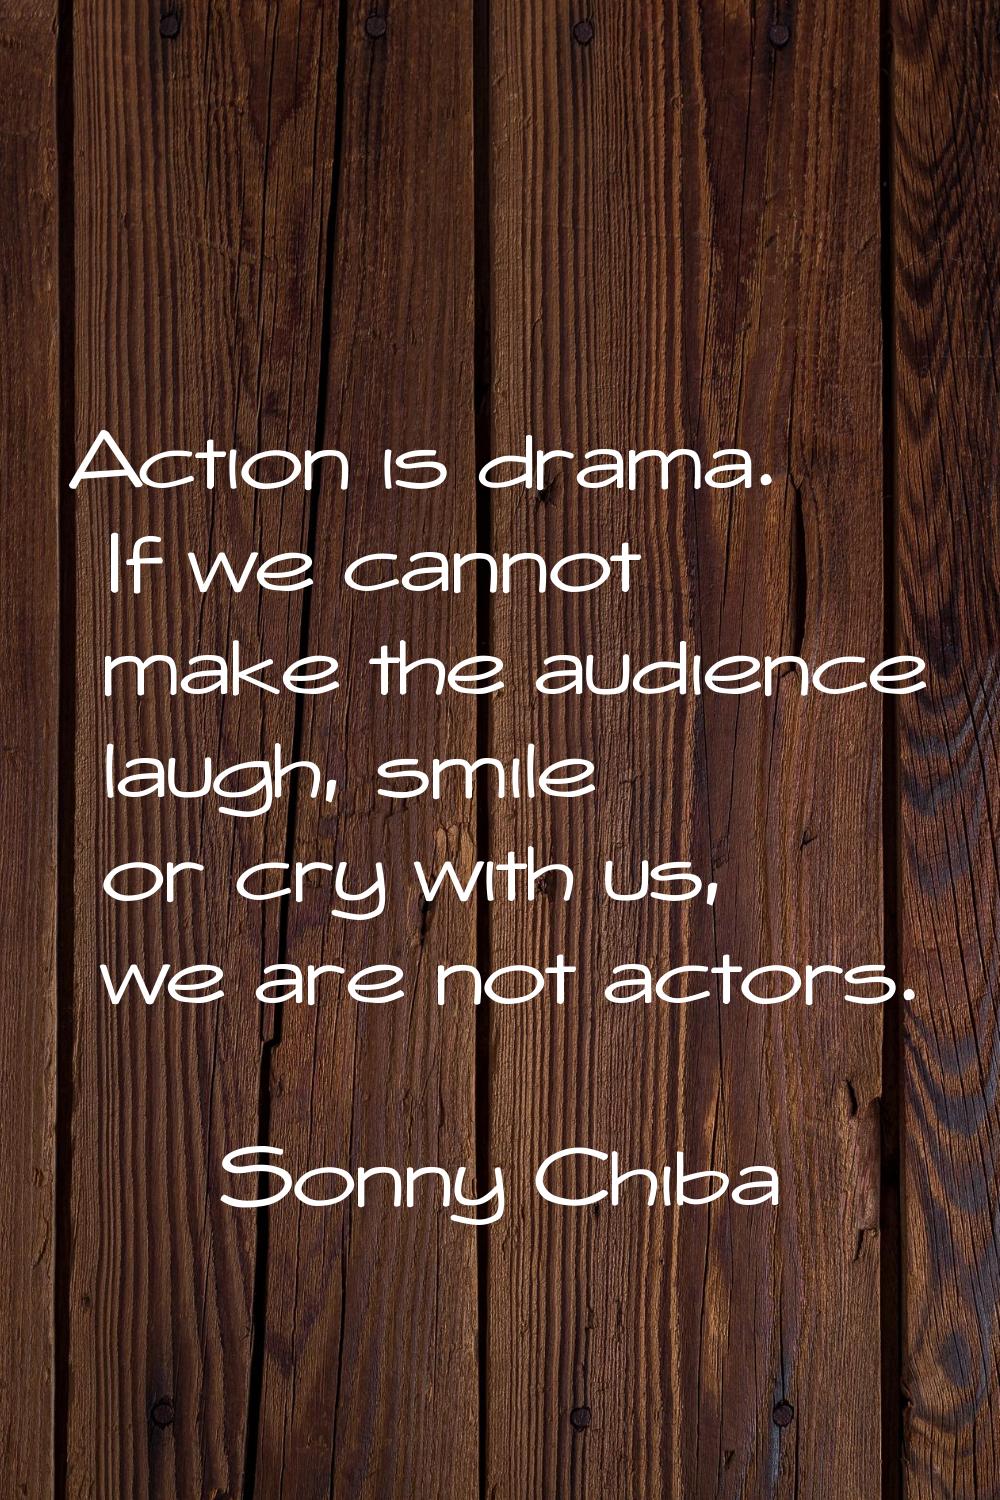 Action is drama. If we cannot make the audience laugh, smile or cry with us, we are not actors.